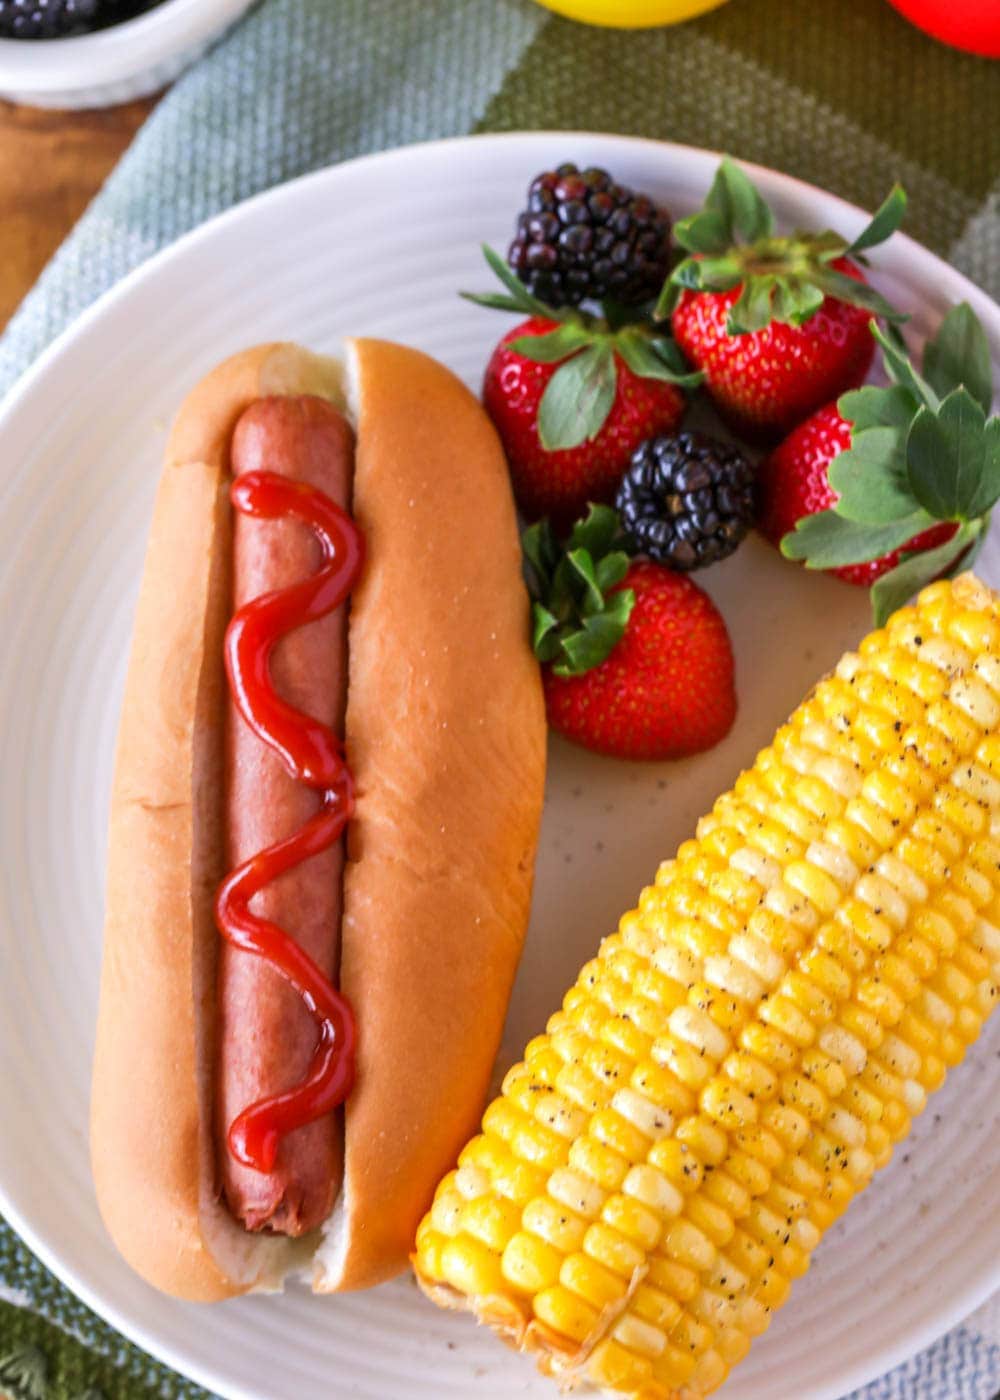 Boiled hot dog in a bun on a plate with corn and fruit on the side